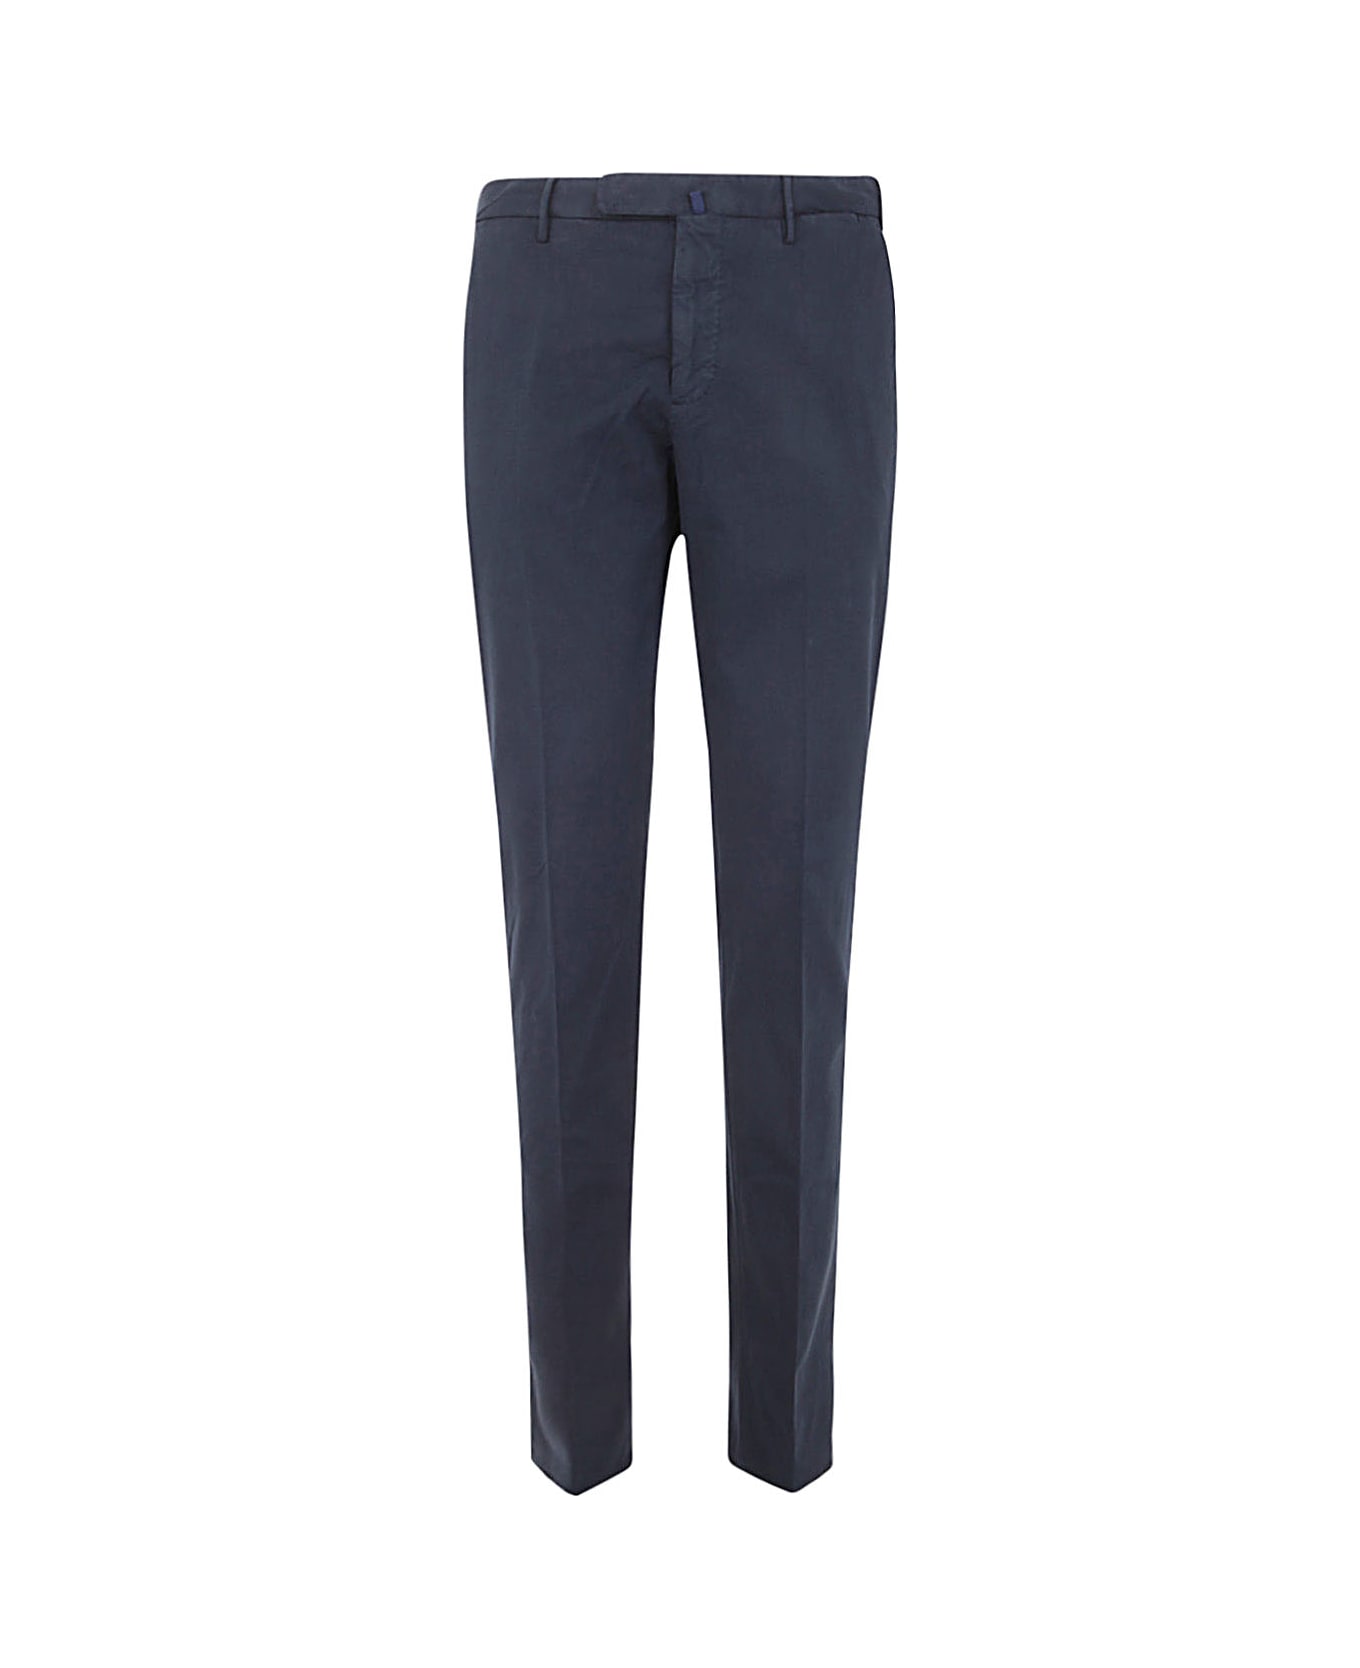 Incotex Cotton Classic Trousers - Blue ボトムス